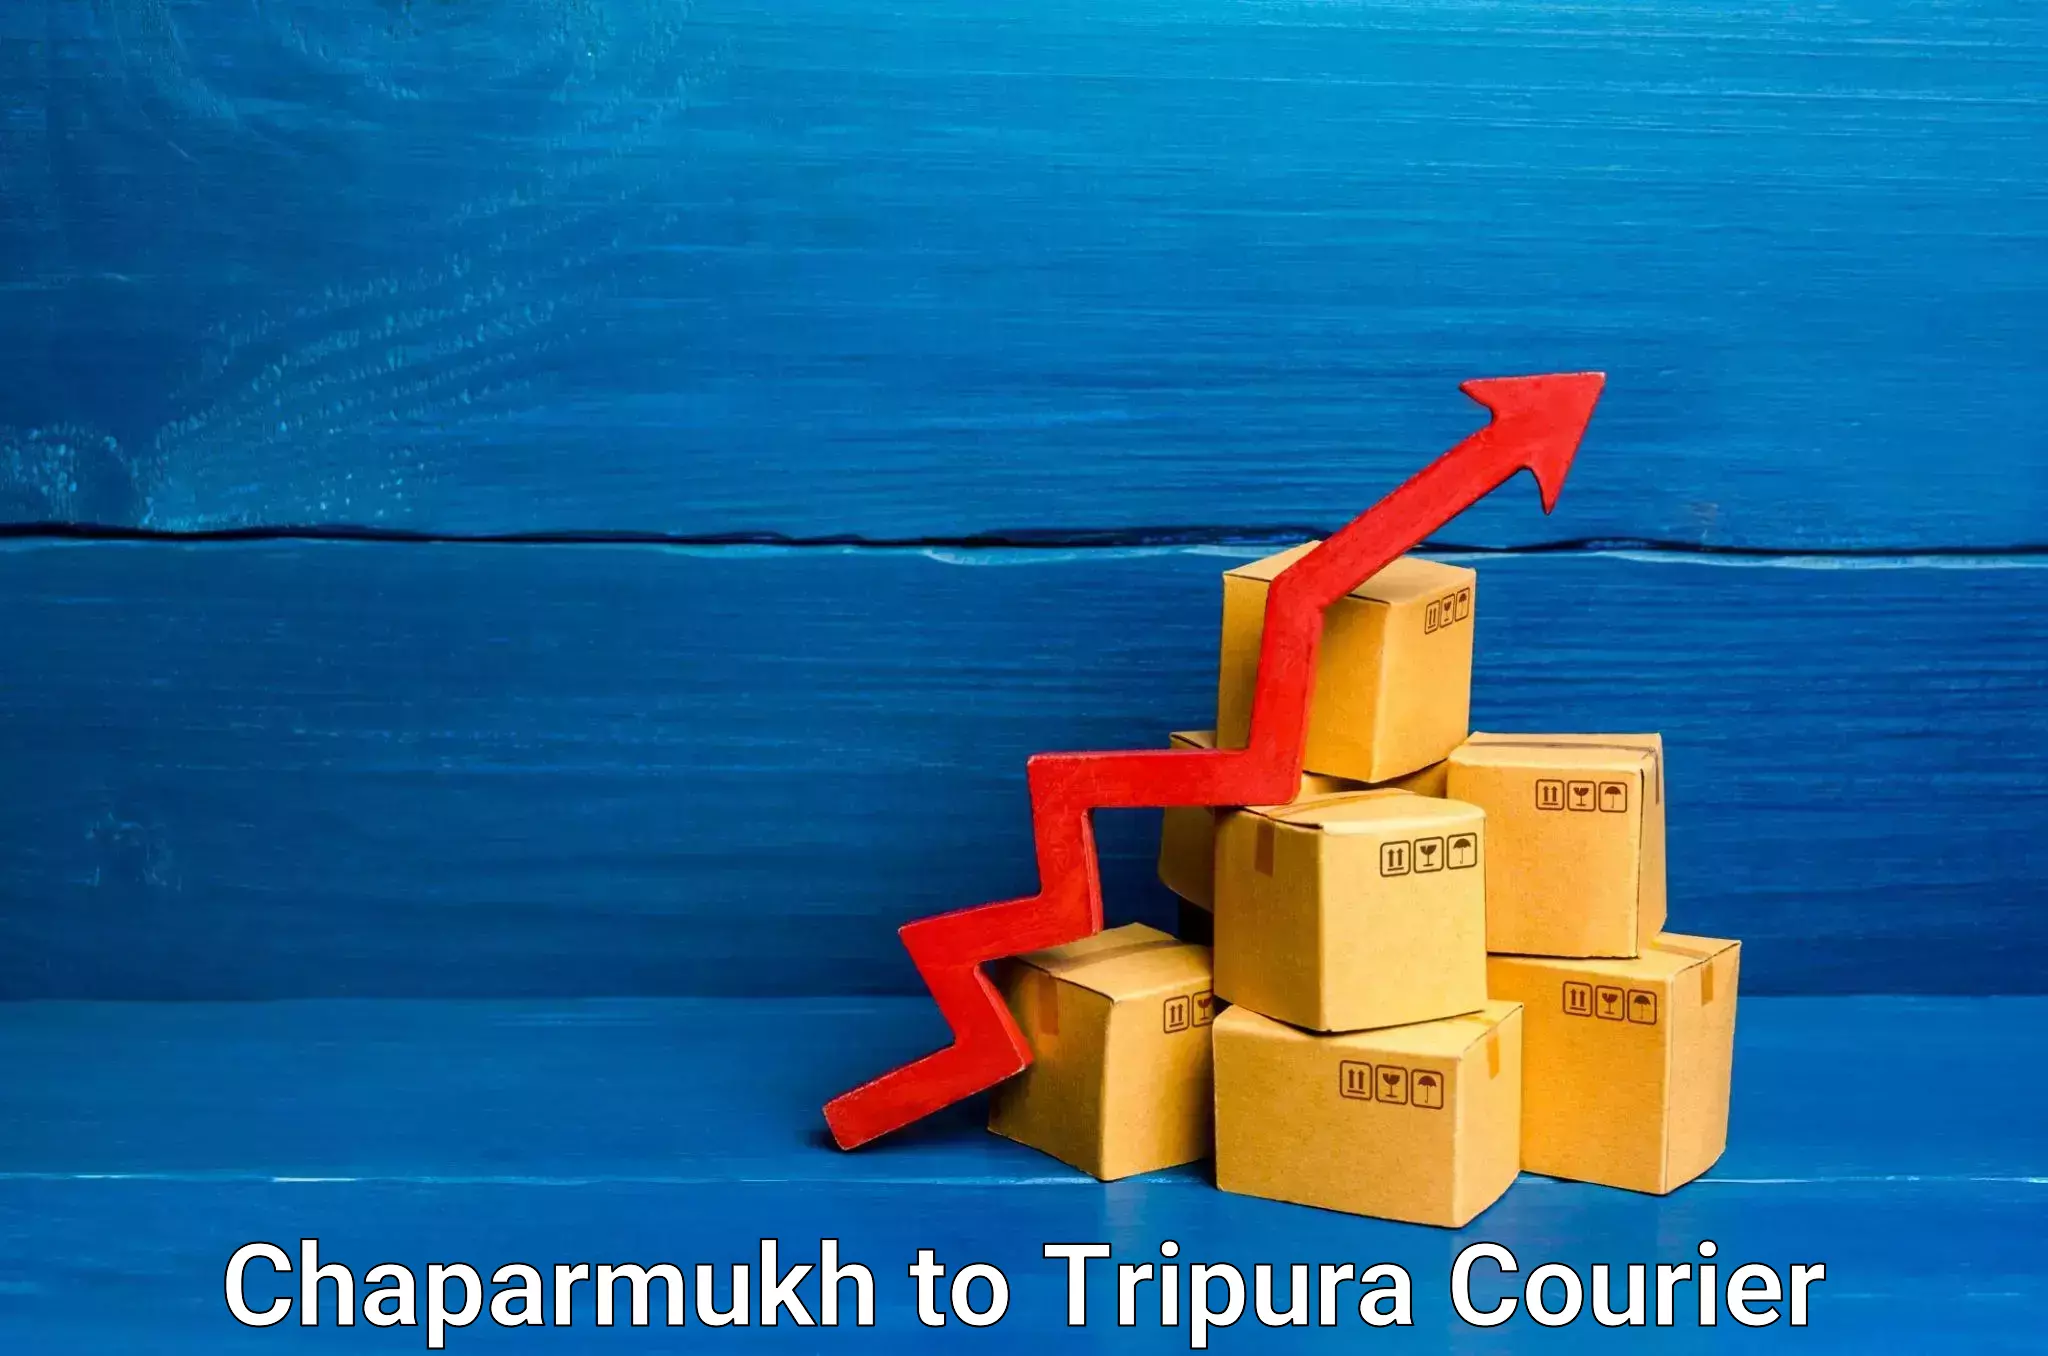 High value parcel delivery in Chaparmukh to Udaipur Tripura